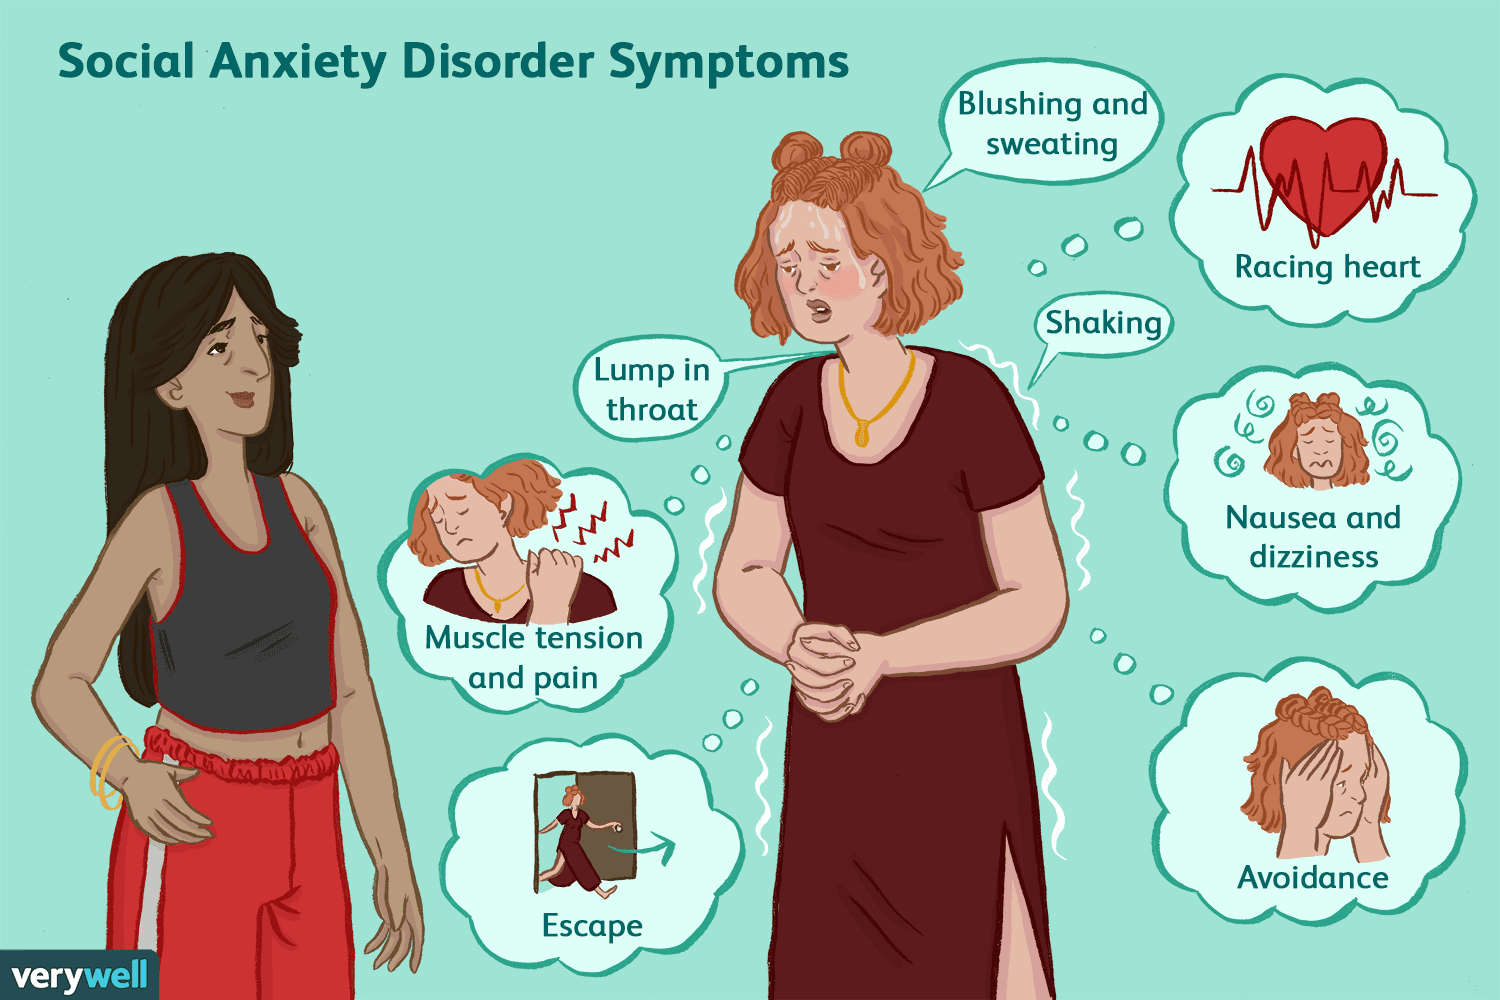 Illustration for Social Anxiety Disorder two ladies showing symtoms.